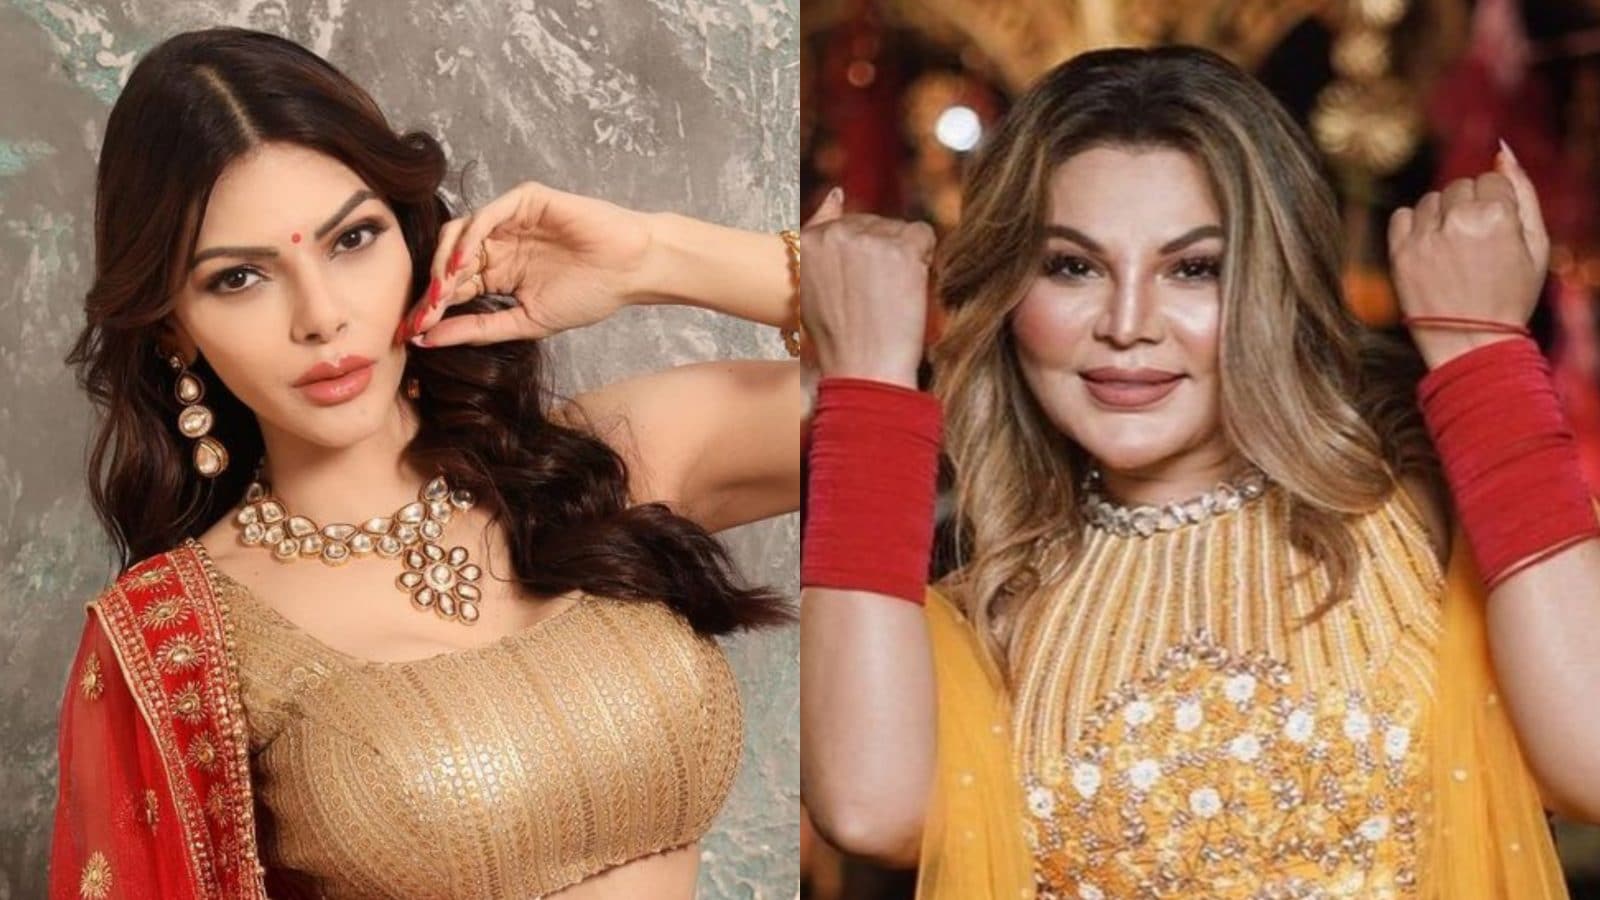 New Porn Video Rakhi Savant - Sherlyn Chopra Asks Rakhi Sawant To Get Aside, Says 'My Fight Is Not With  Her' - News18